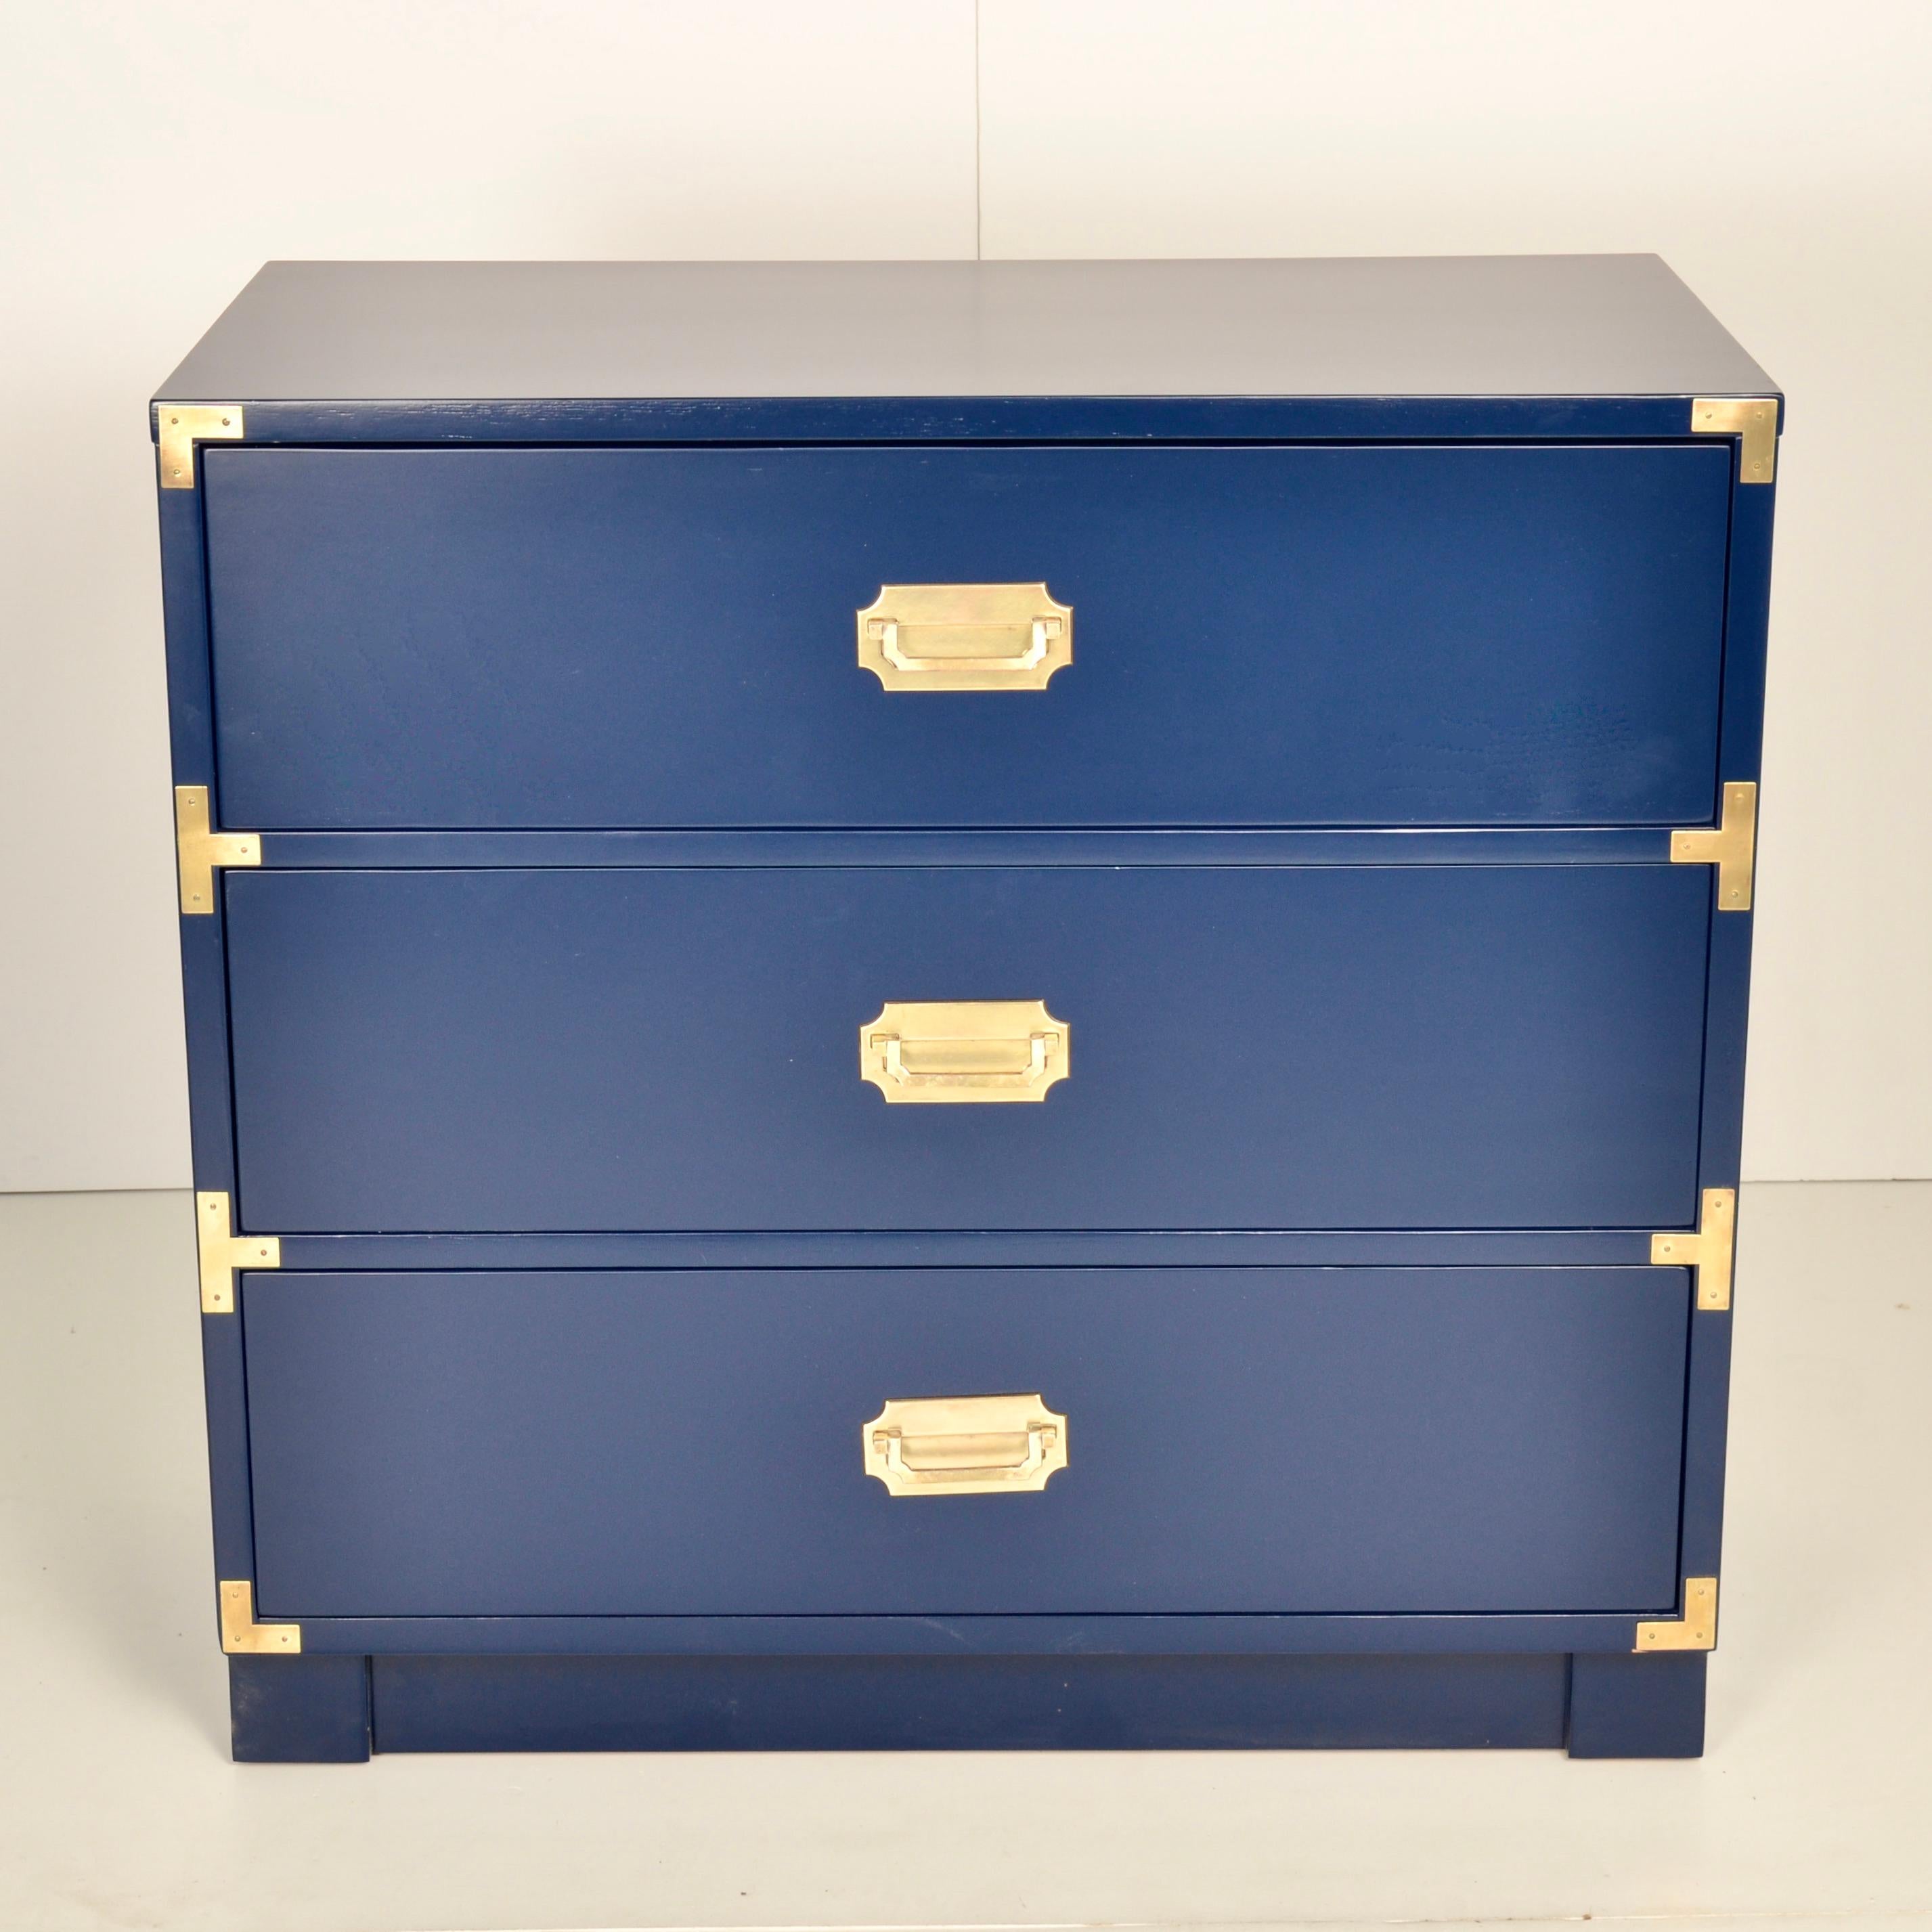 Handsome pair of chests, newly lacquered in satin finish BM Old Navy. Solid brass hardware, hand polished. Wood drawers. Great medium size at: 32